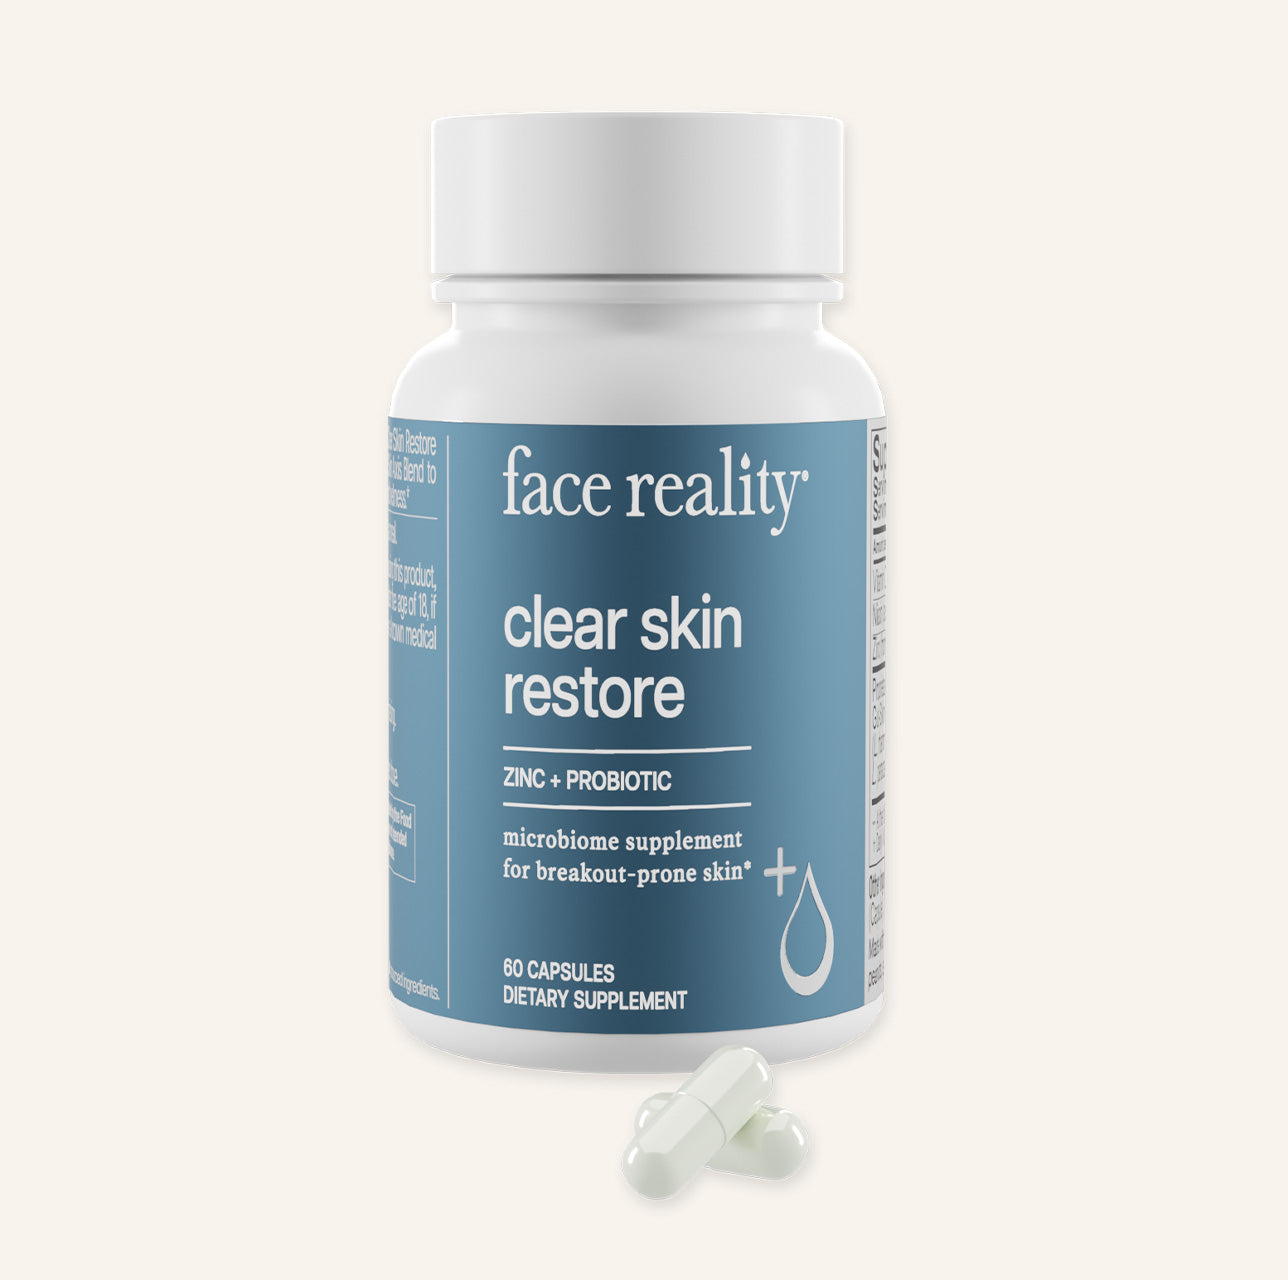 All – Face Reality Skincare